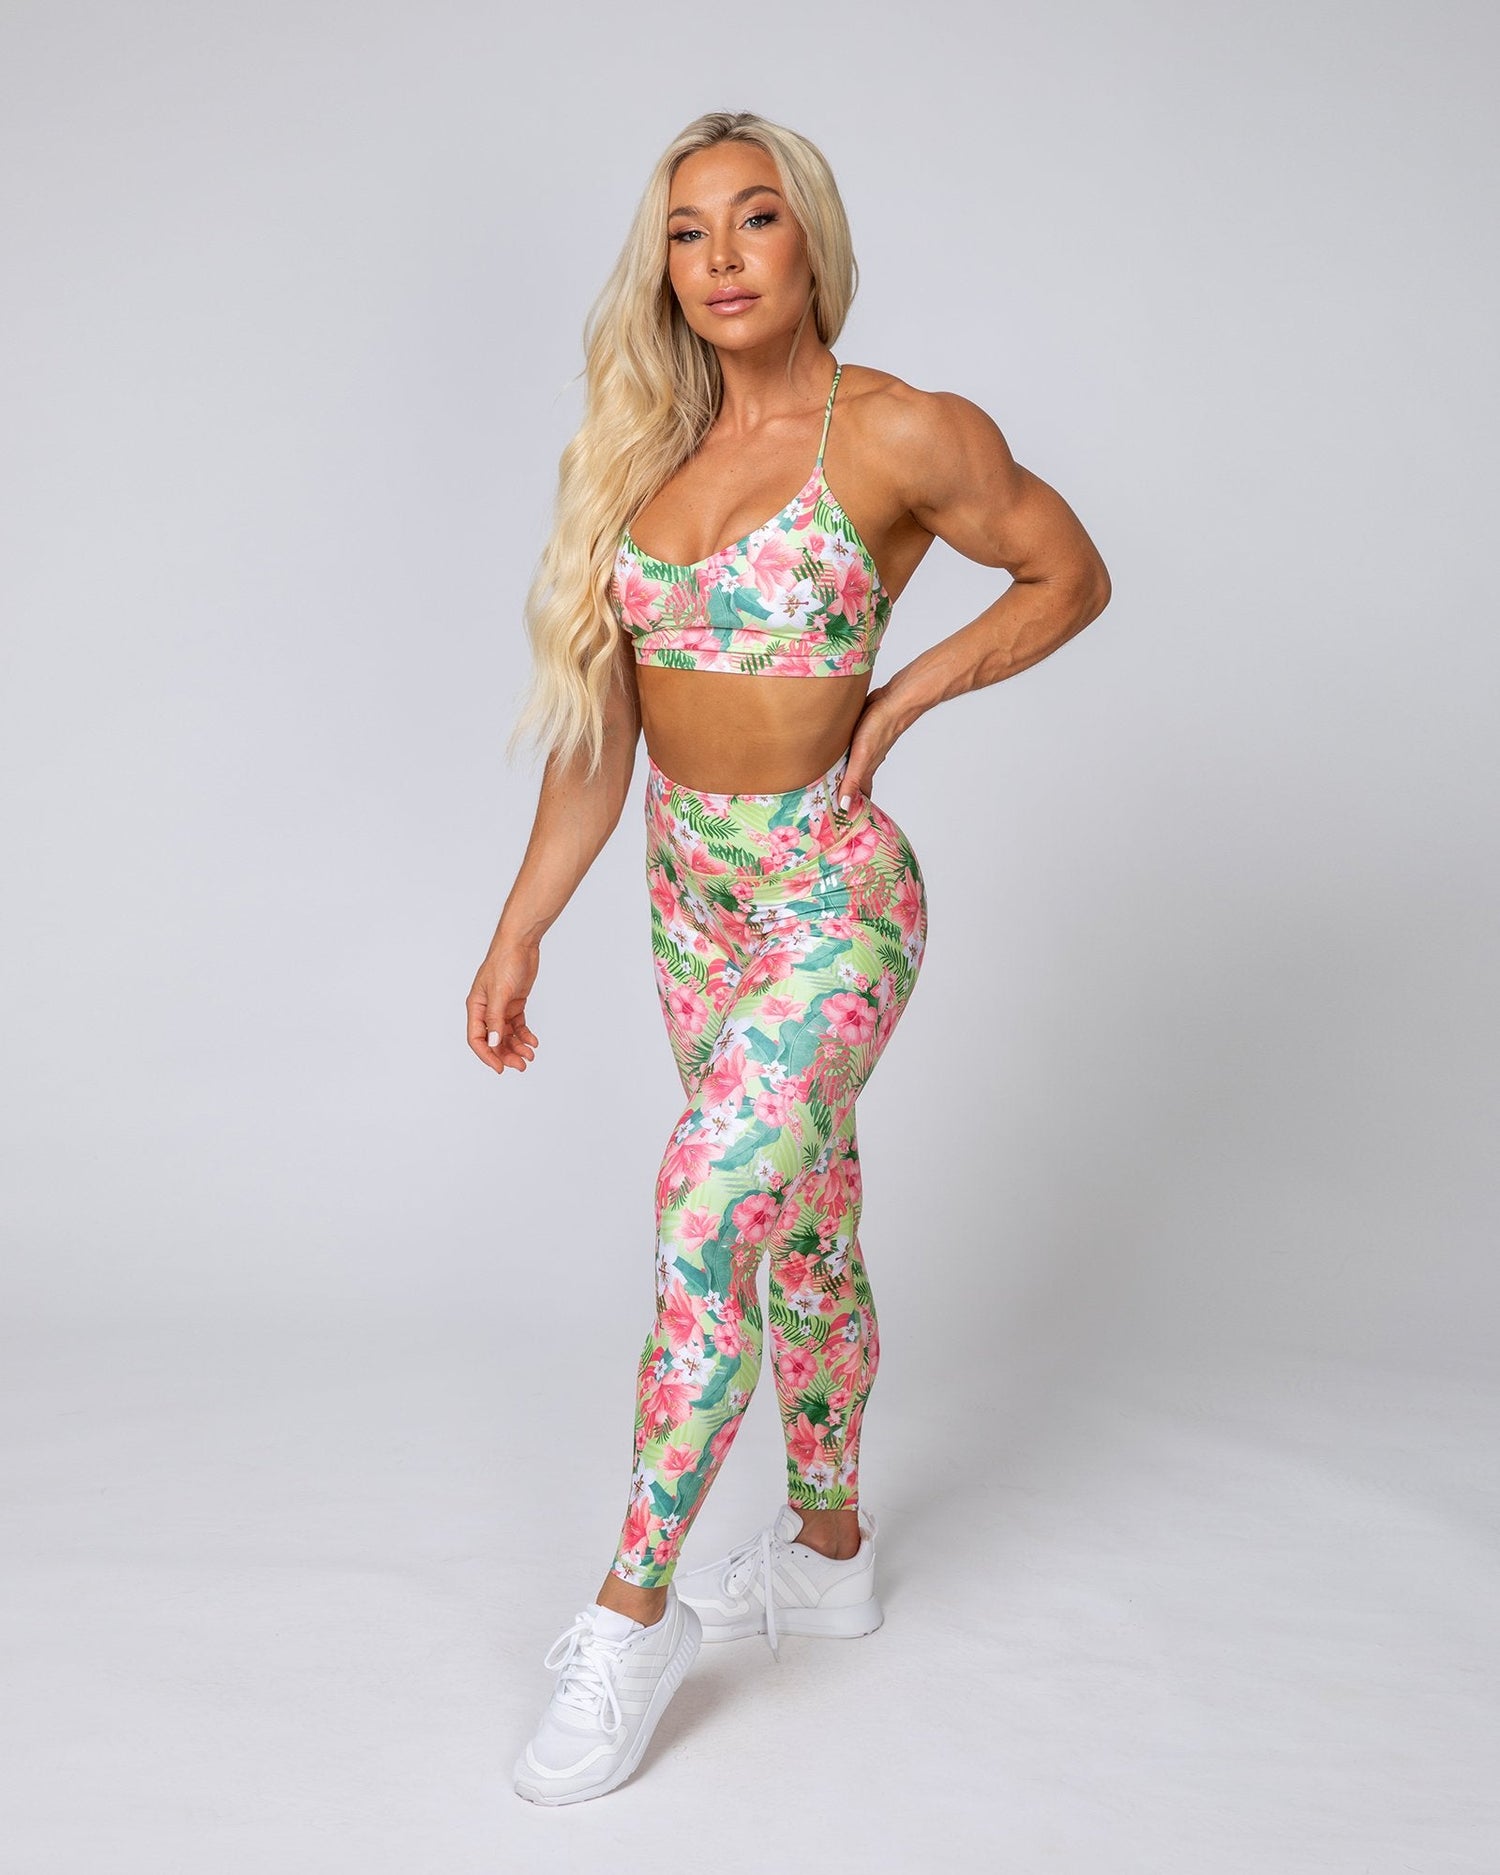 SOFT BRUSHED FLORAL PRINT, FULL LENGTH, HIGH WAISTED LEGGINGS IN A FITTED  STYLE WITH AN ELASTIC WAISTBAND, SIDE STRIPES, AND FRONT TIE. SUPER SOFT,  STRETCHY AND COMFORTABLE. SIZE:S-M-L-XL(1-2-2-1) PACKAGE:6PCS/PREPACK 94%  POLYESTER 6%SPANDEX